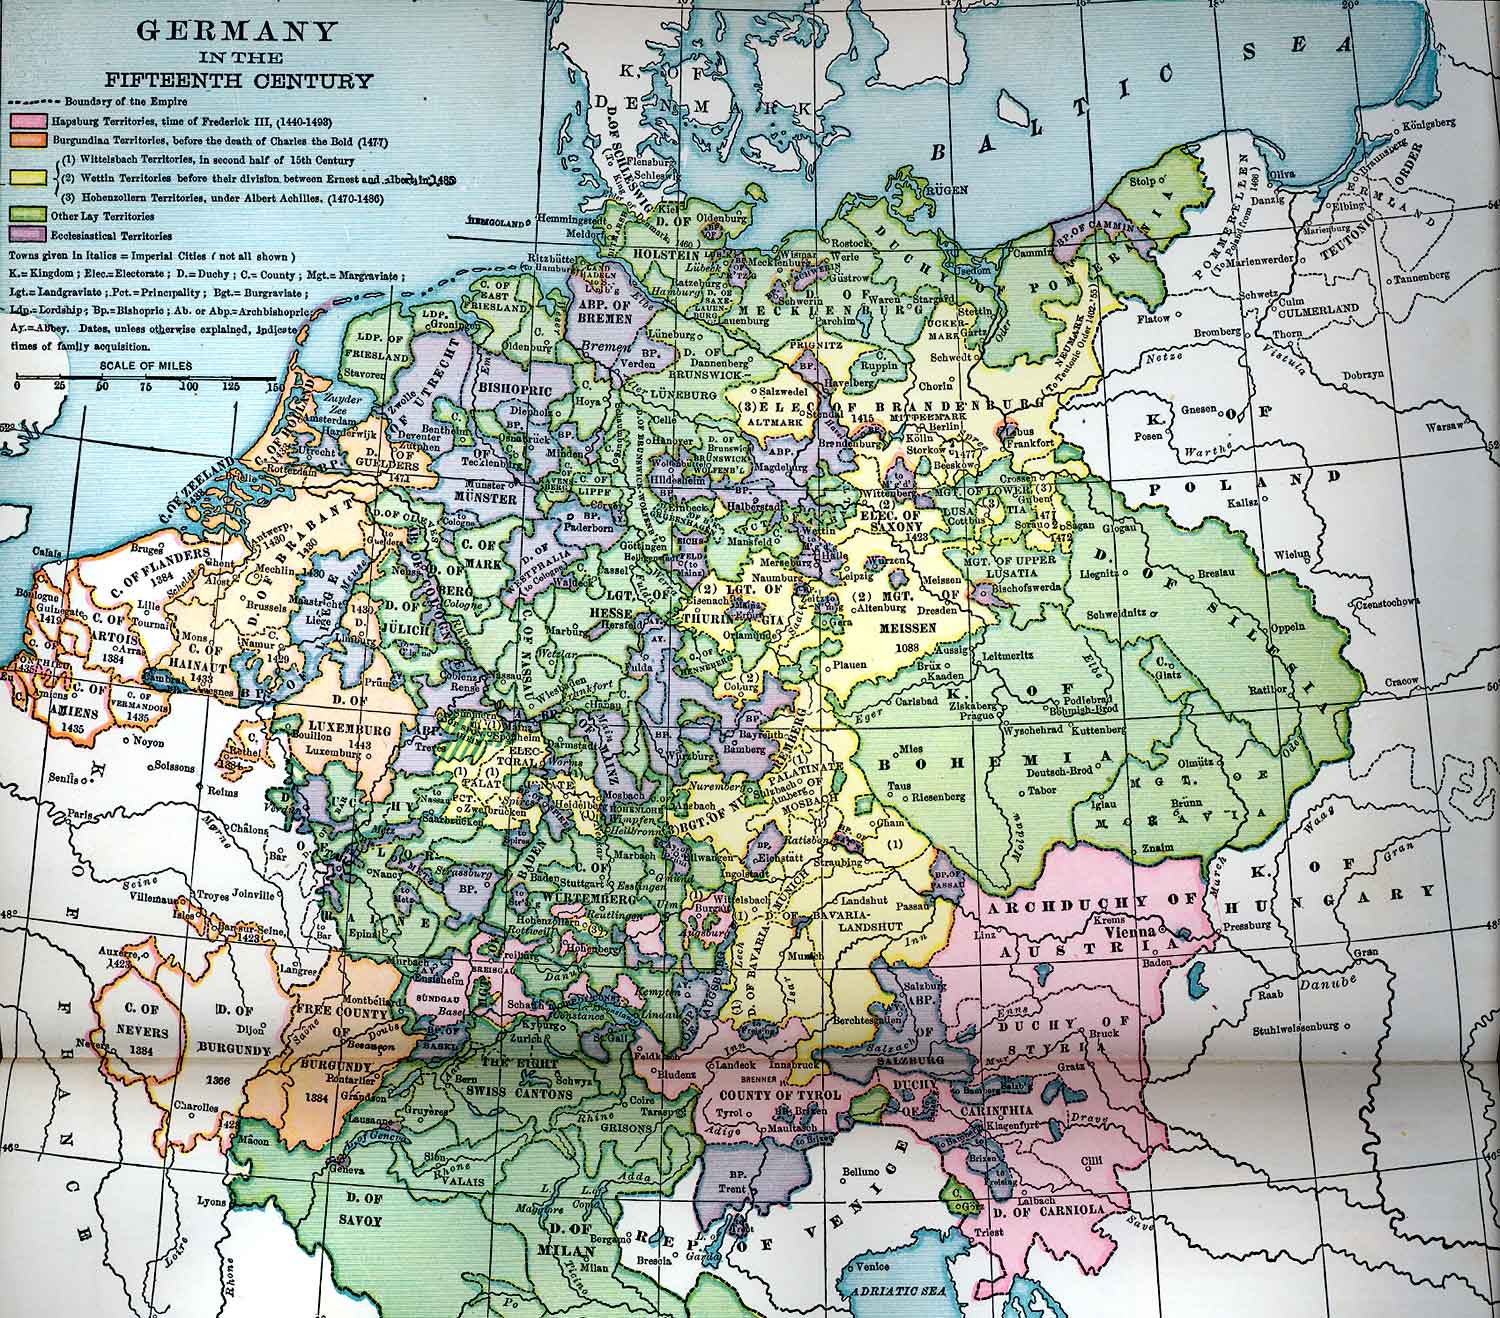 Germany during the Fifteenth Century